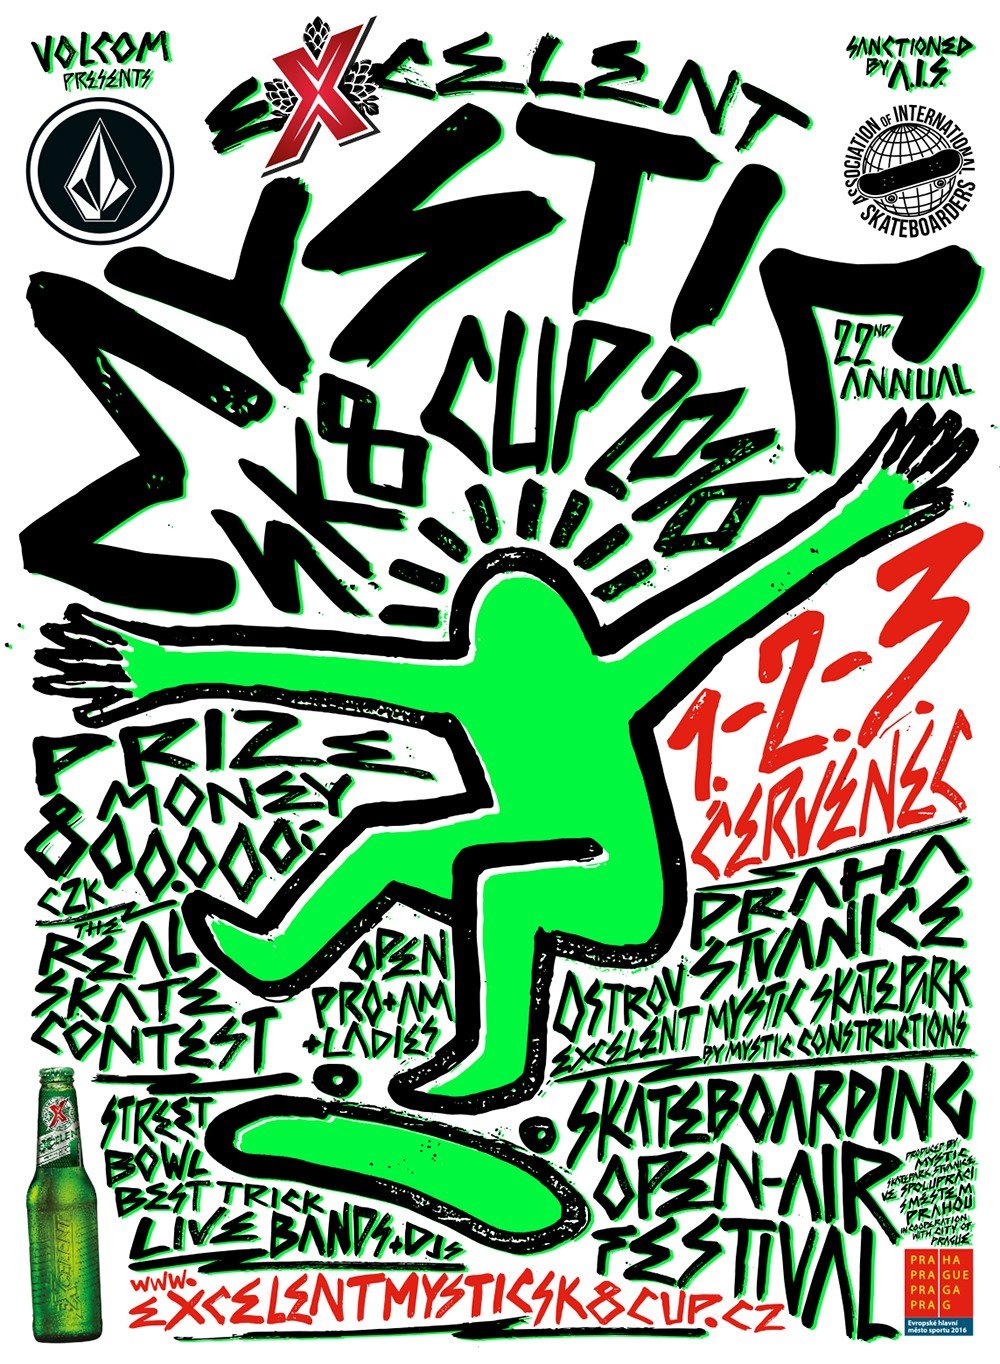 22nd annual Excellent Mystic Sk8 Cup 33.000 US$